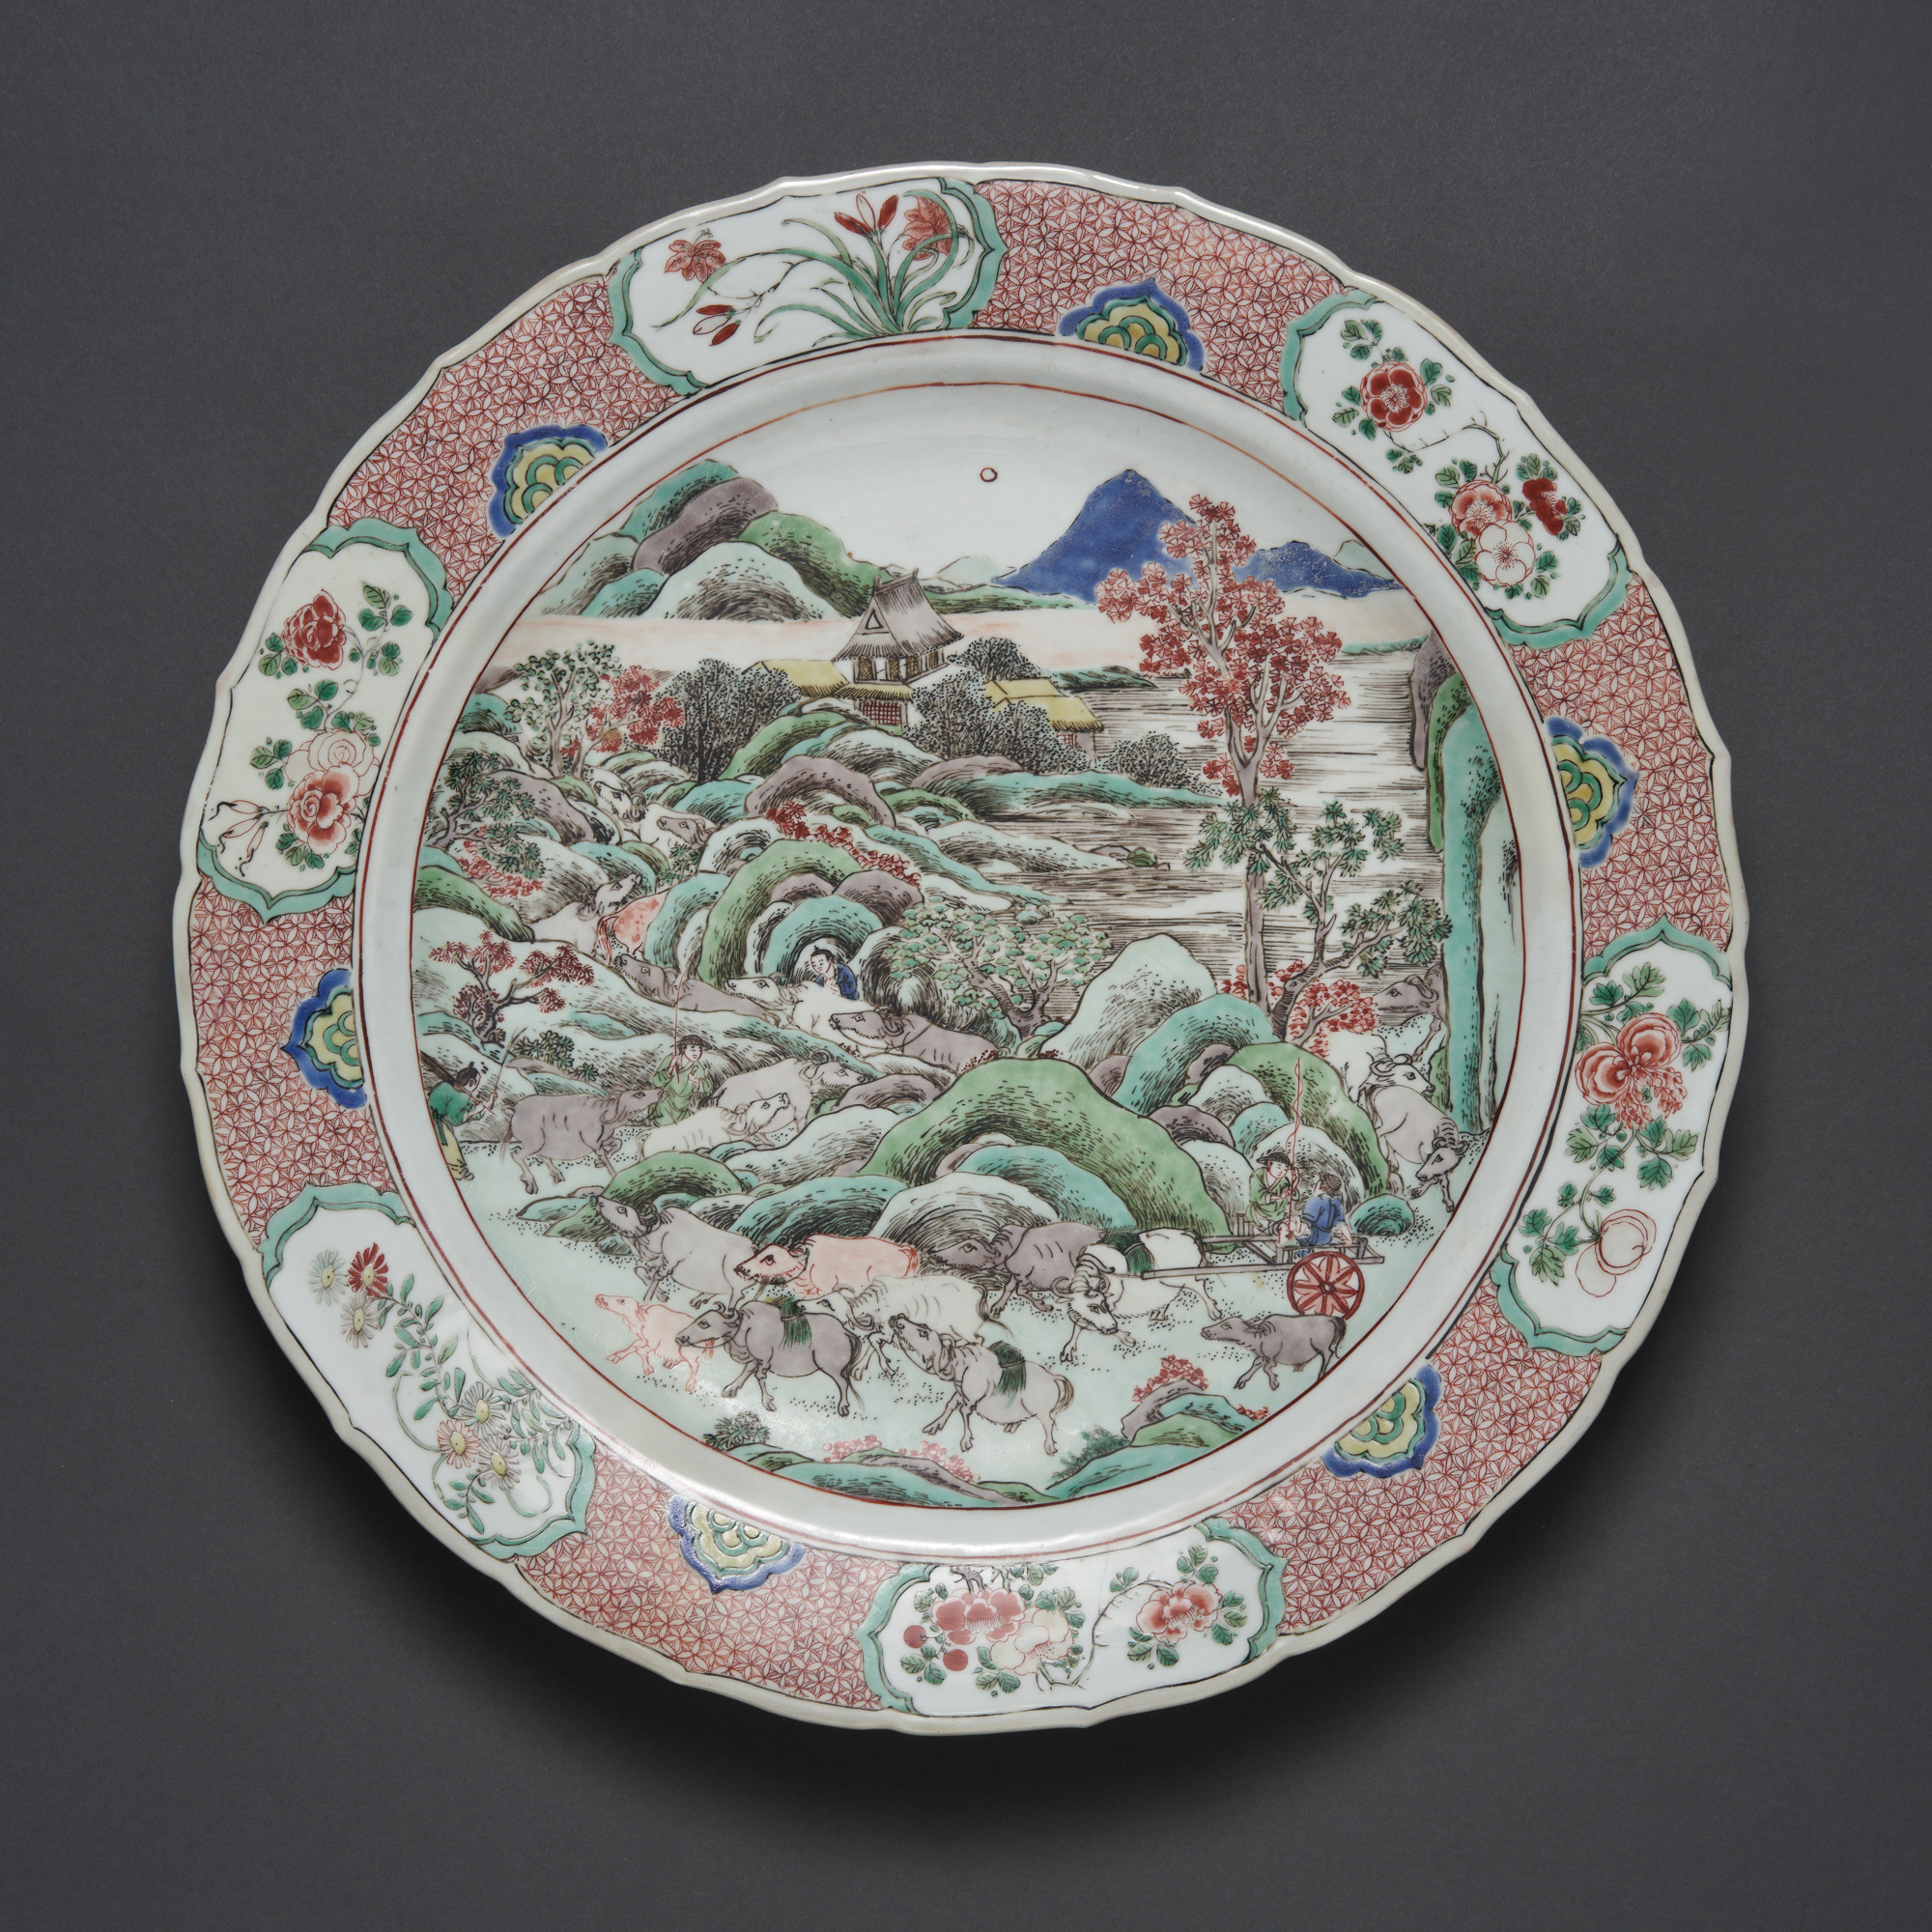 Unknown, Dish, Qing dynasty, Kangxi period, late 17th century. Glazed and enameled porcelain. Museum purchase by Friends of Amy Clague.